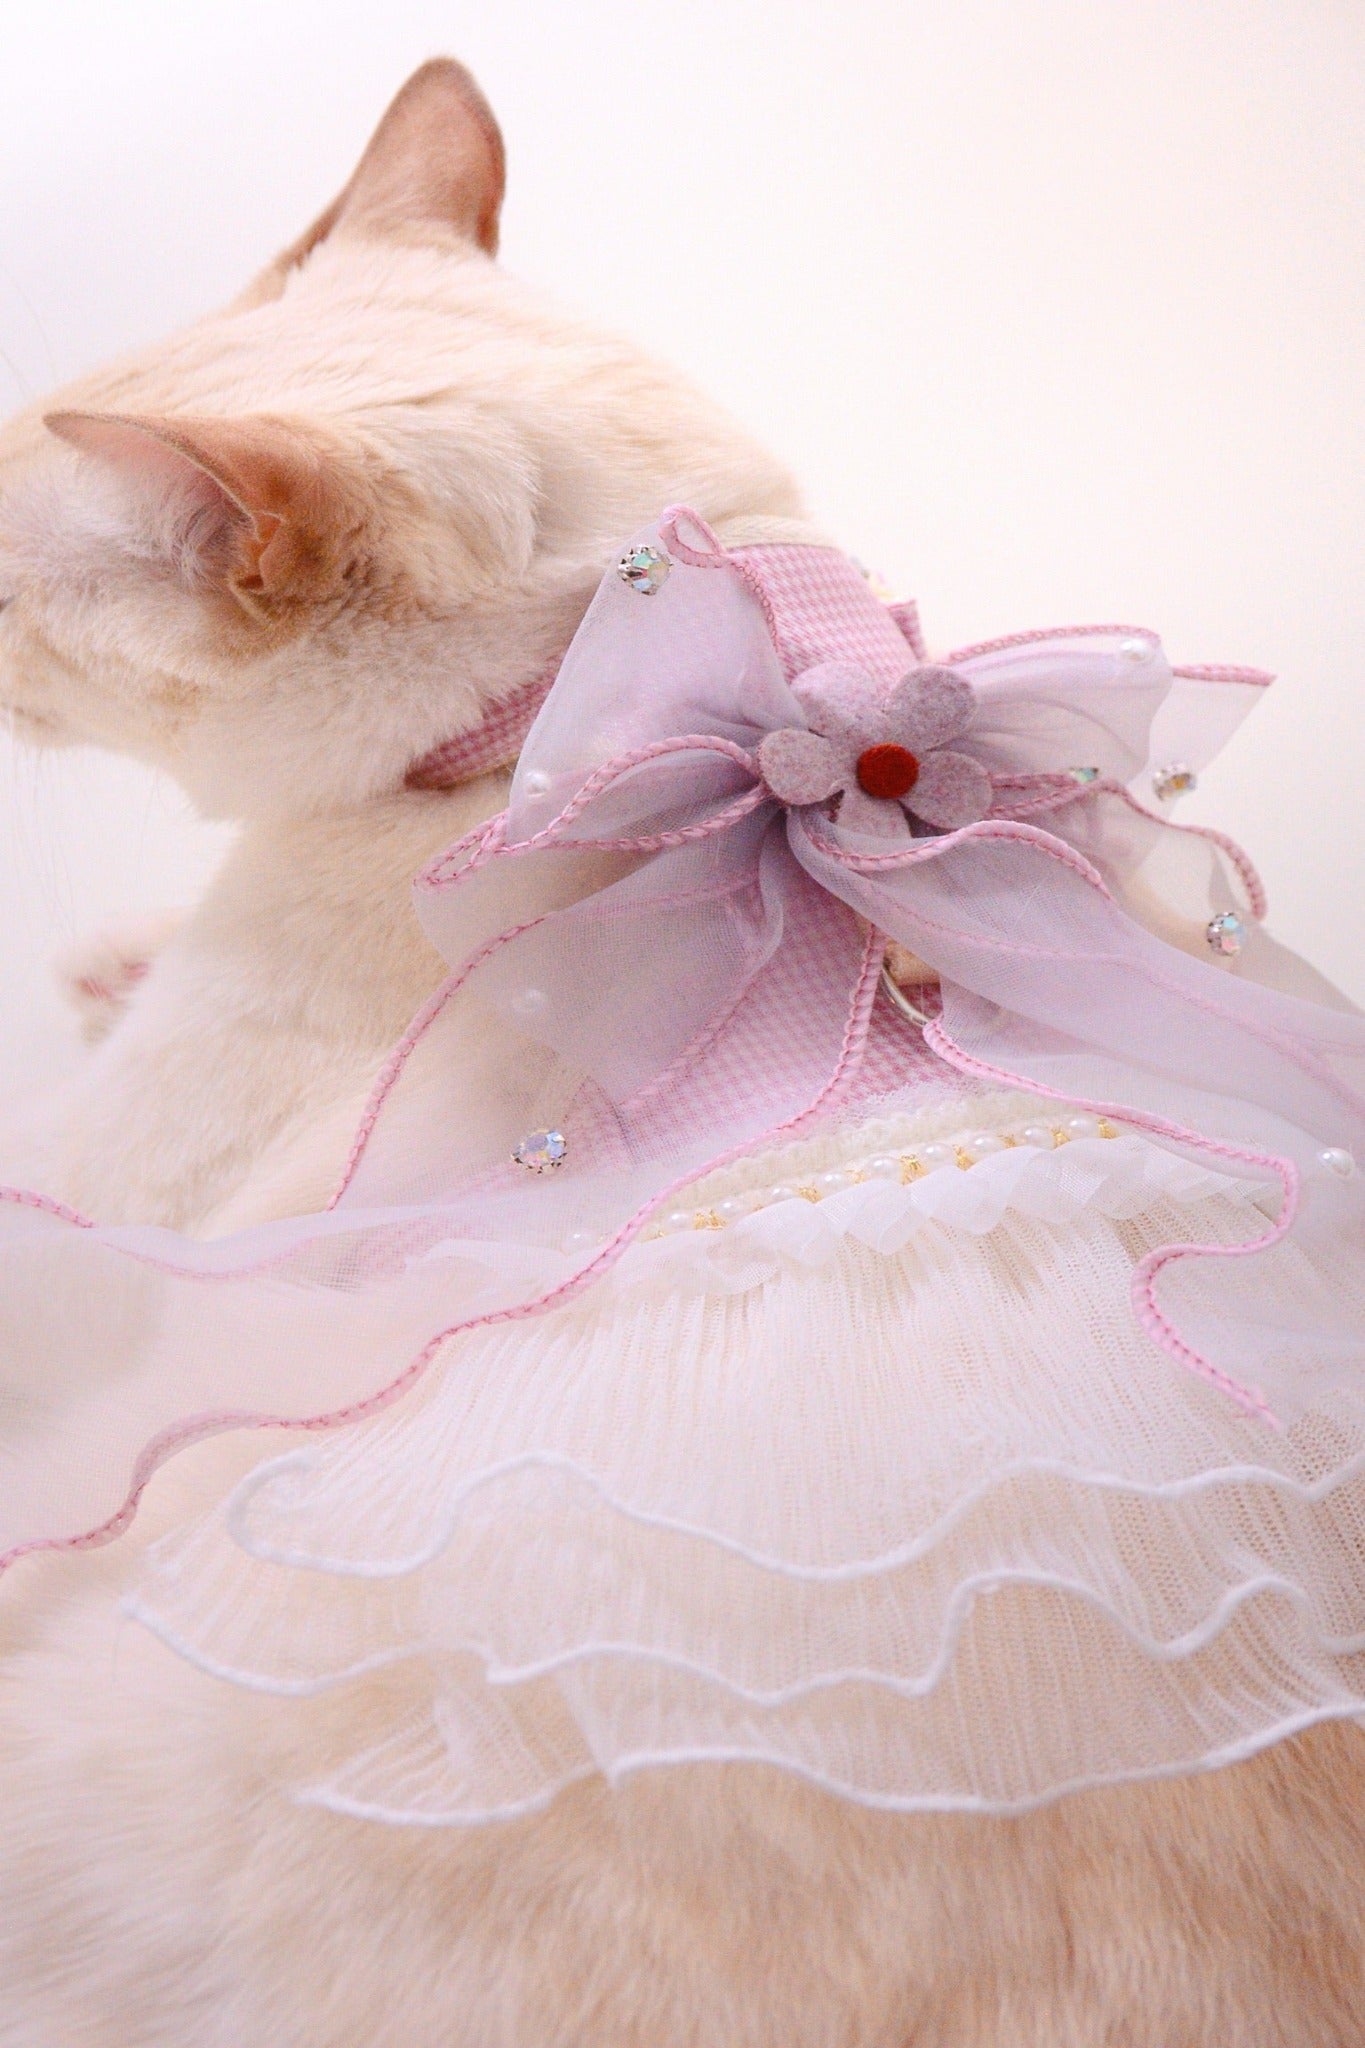 Pink Snow White Harness Dress For Cat (leash included)